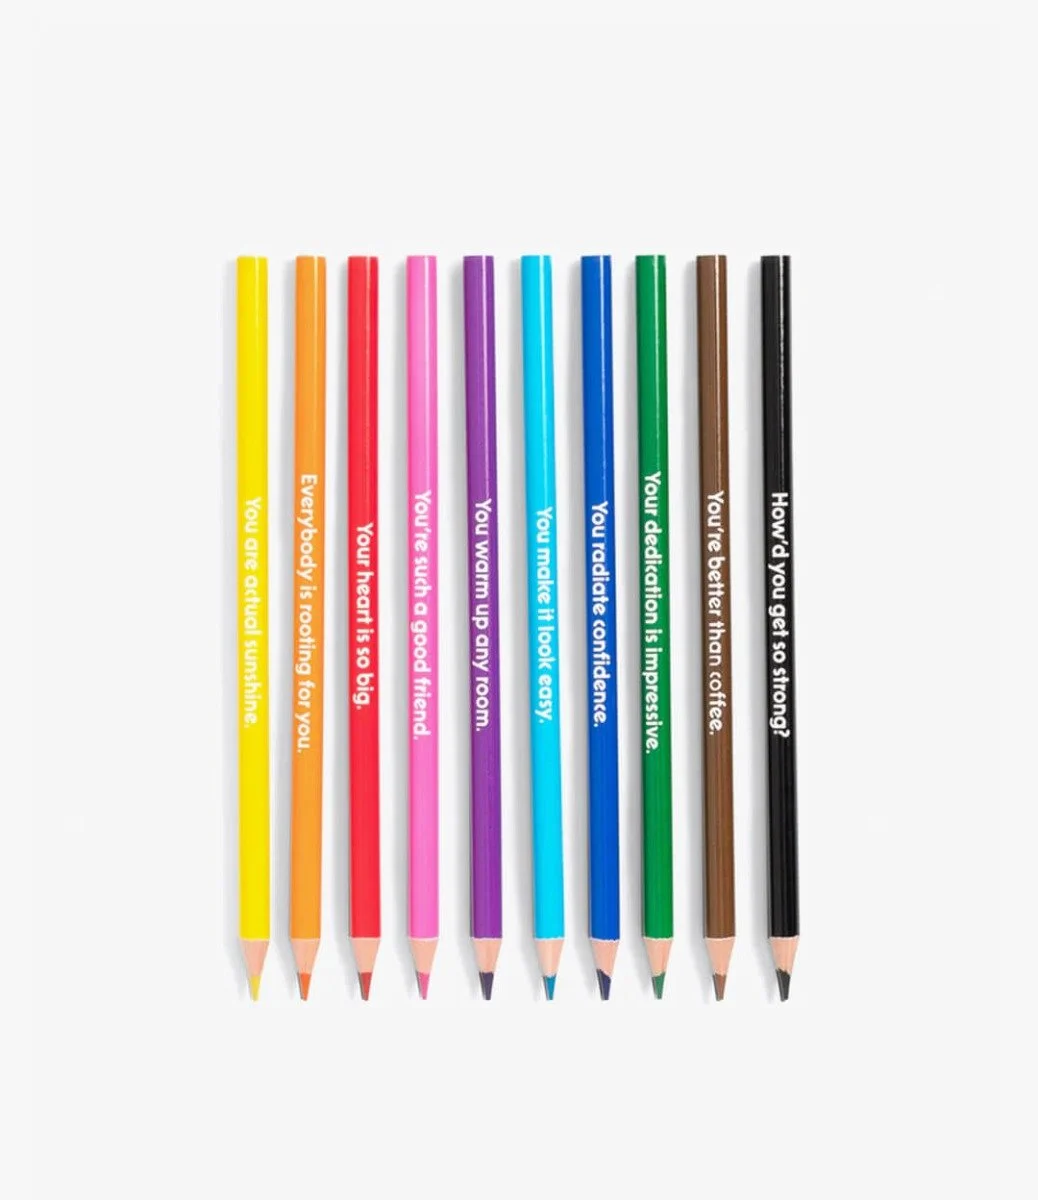 Colored Pencil Set, Compliments by Ban.do